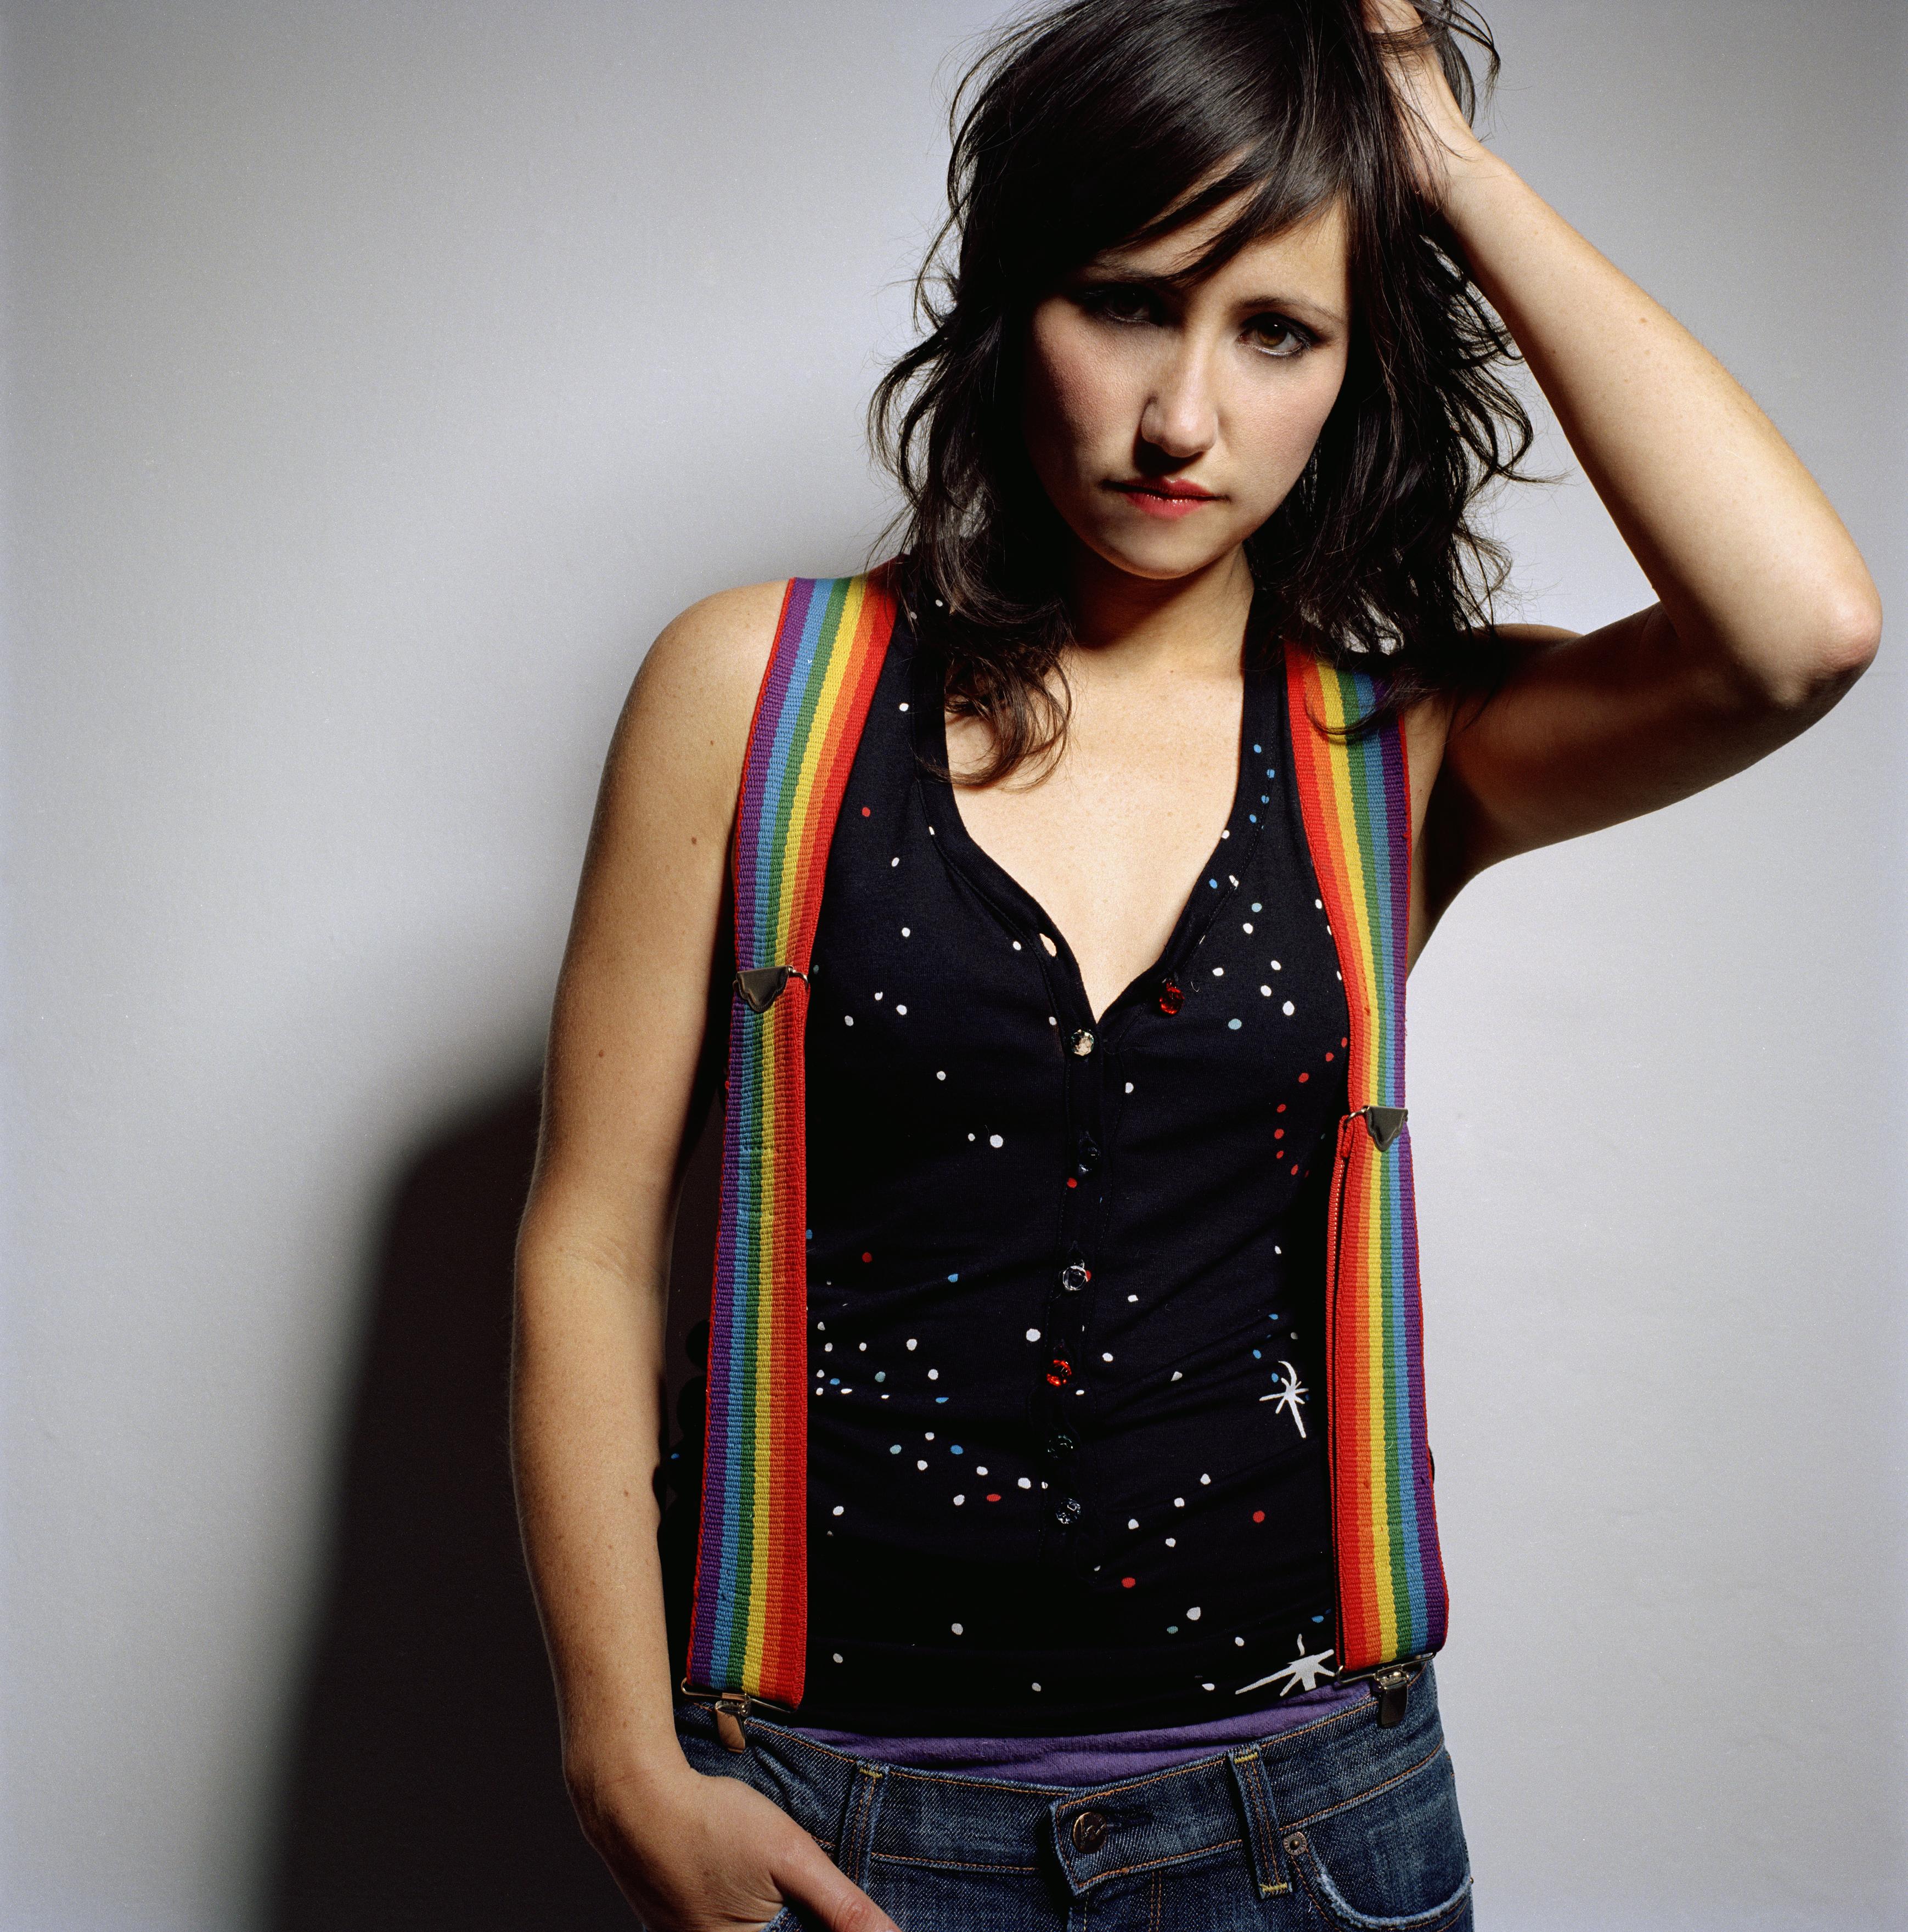 KT Tunstall High Quality Background on Wallpapers Vista